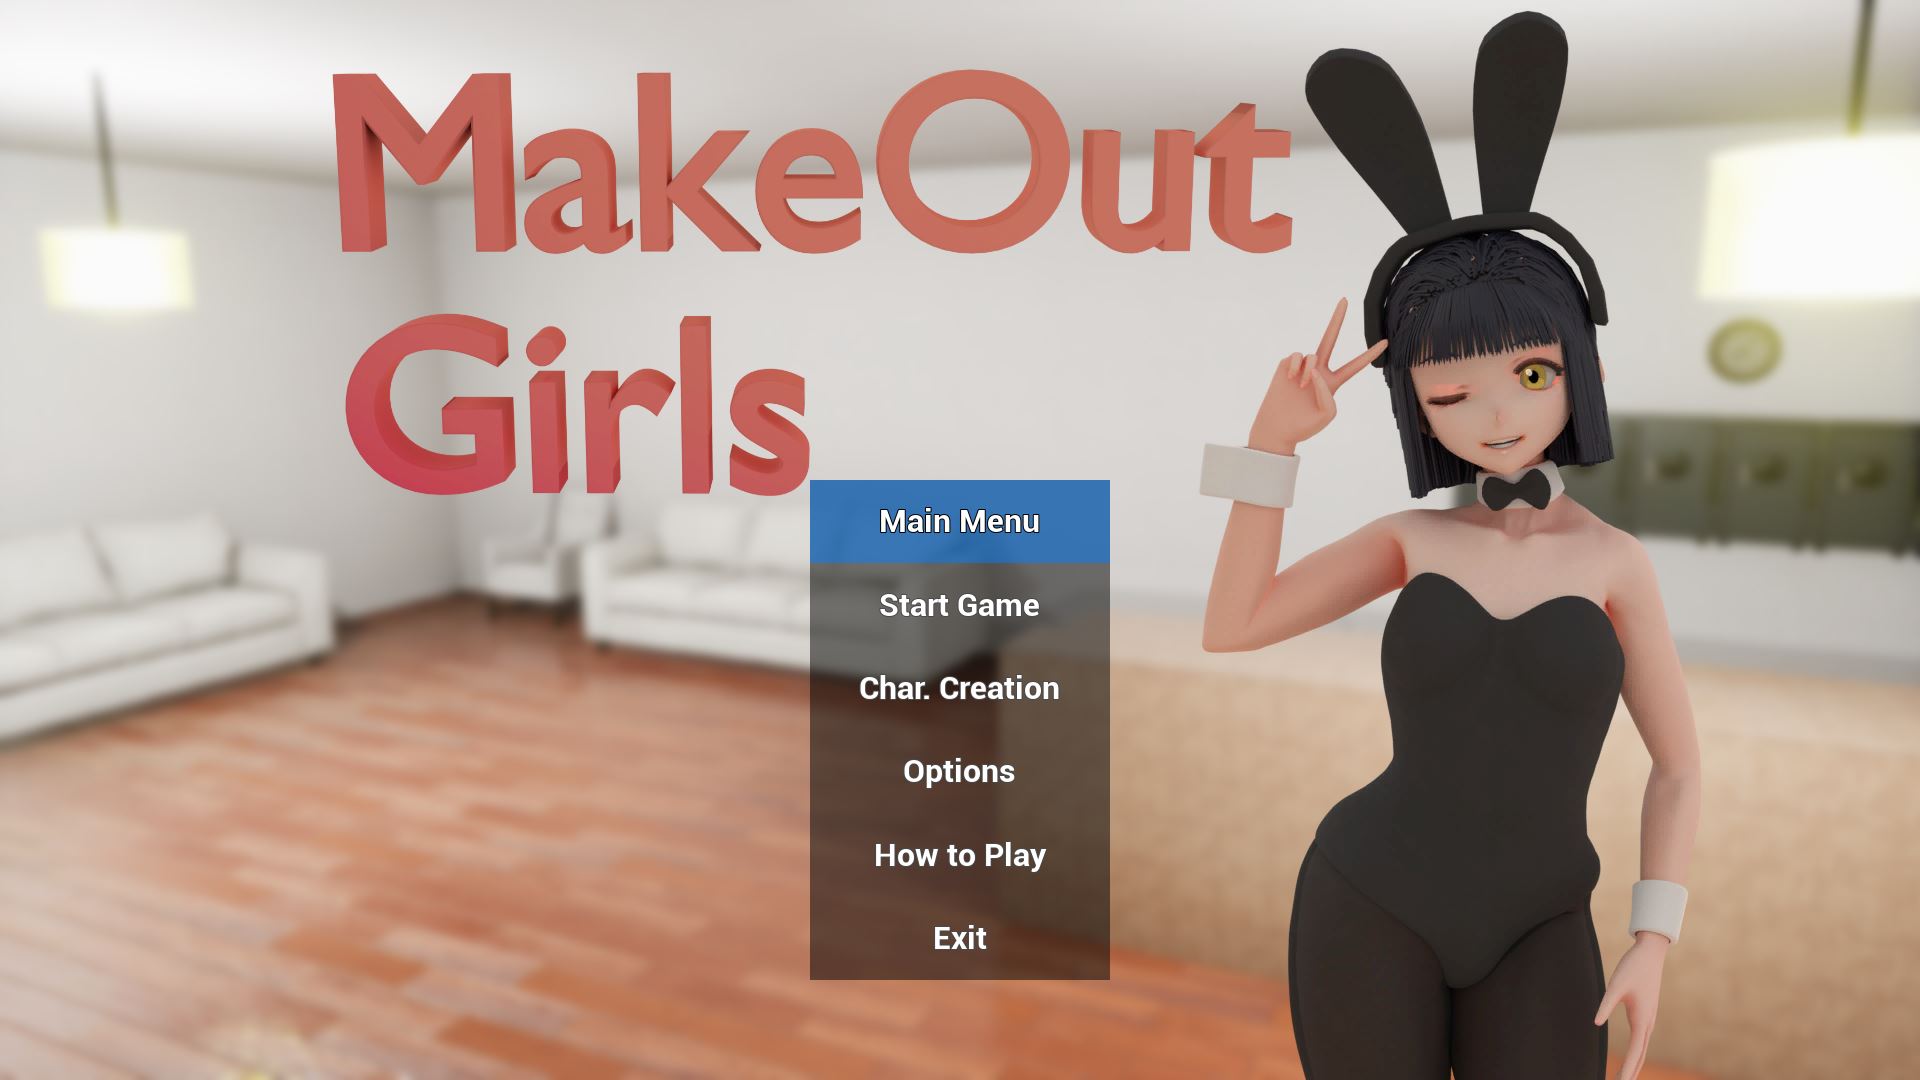 Unreal Engine] MakeOut Girls - v1.10 by Luan Nunes Soft 18+ Adult xxx Porn  Game Download